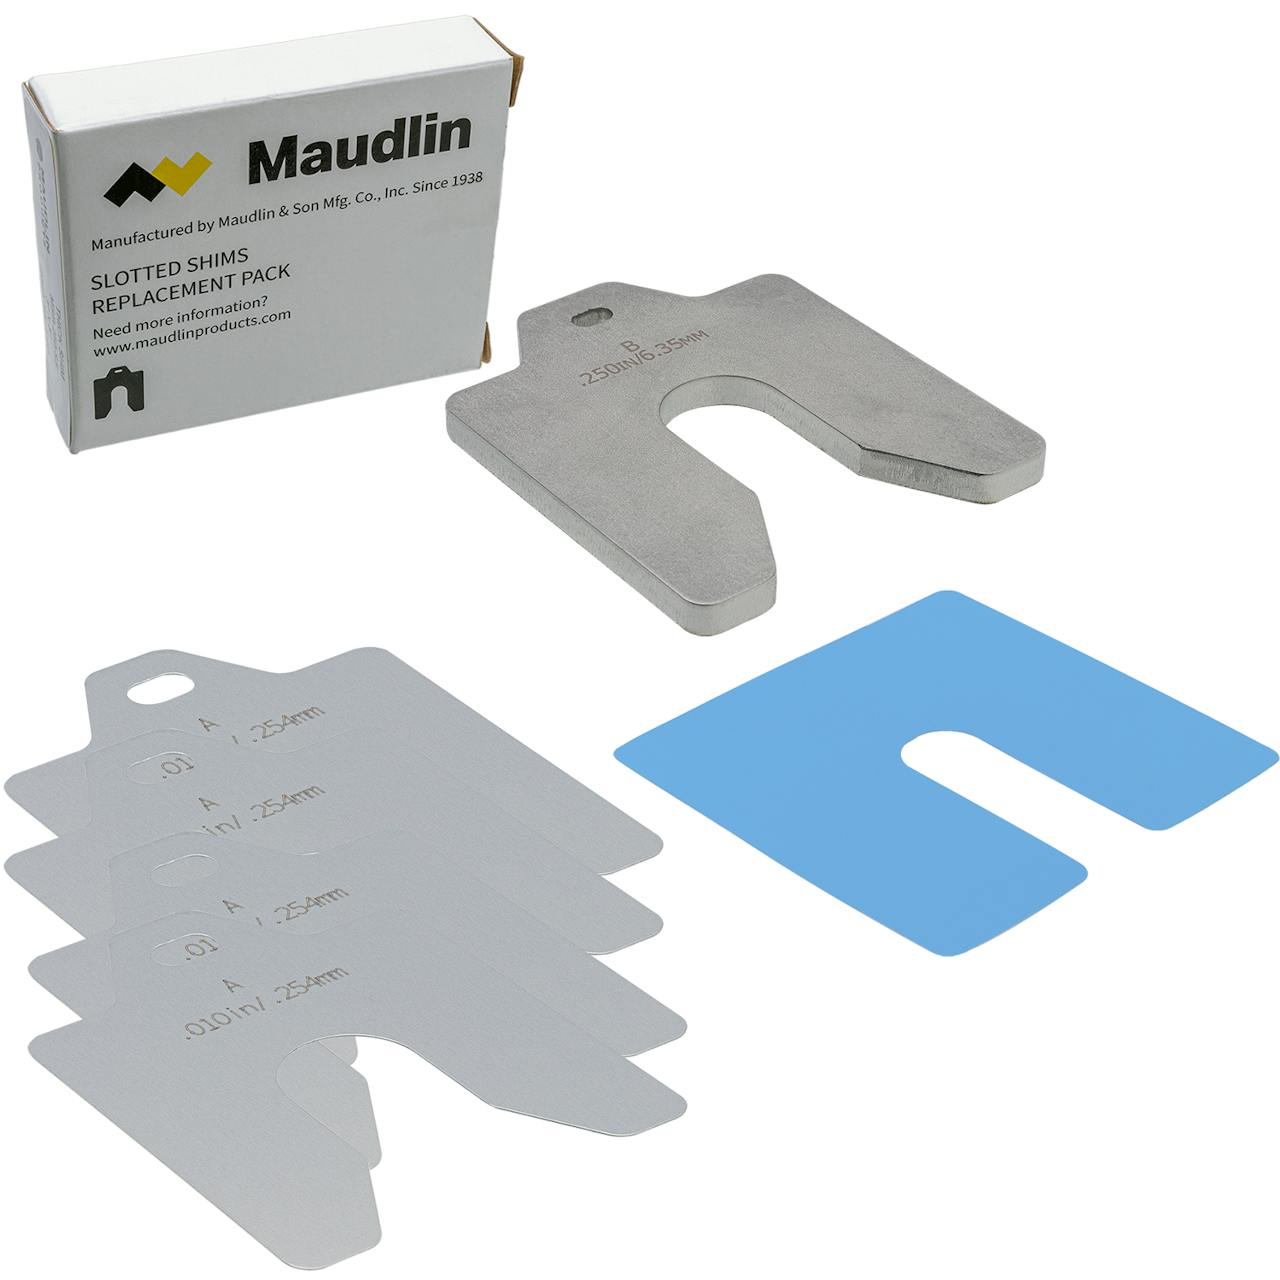 Shims from Maudlin